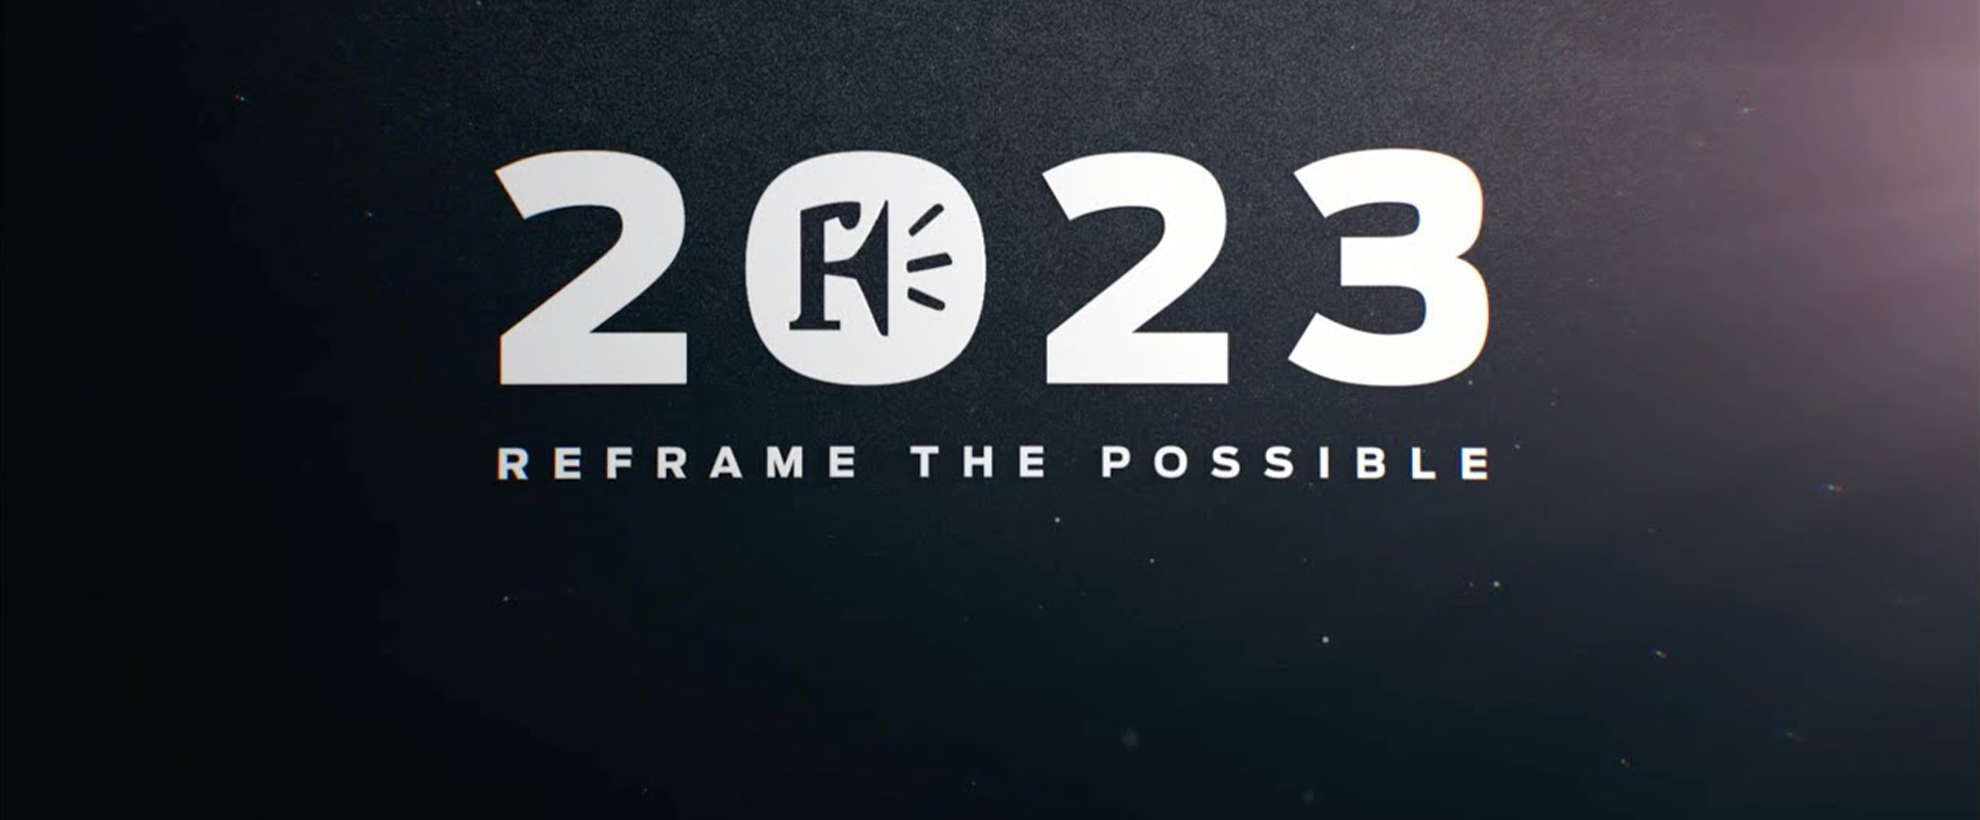 A grey background with 2023 Reframe the Possible written in white text in the centre. The centre of the 0 is the Framestore icon.